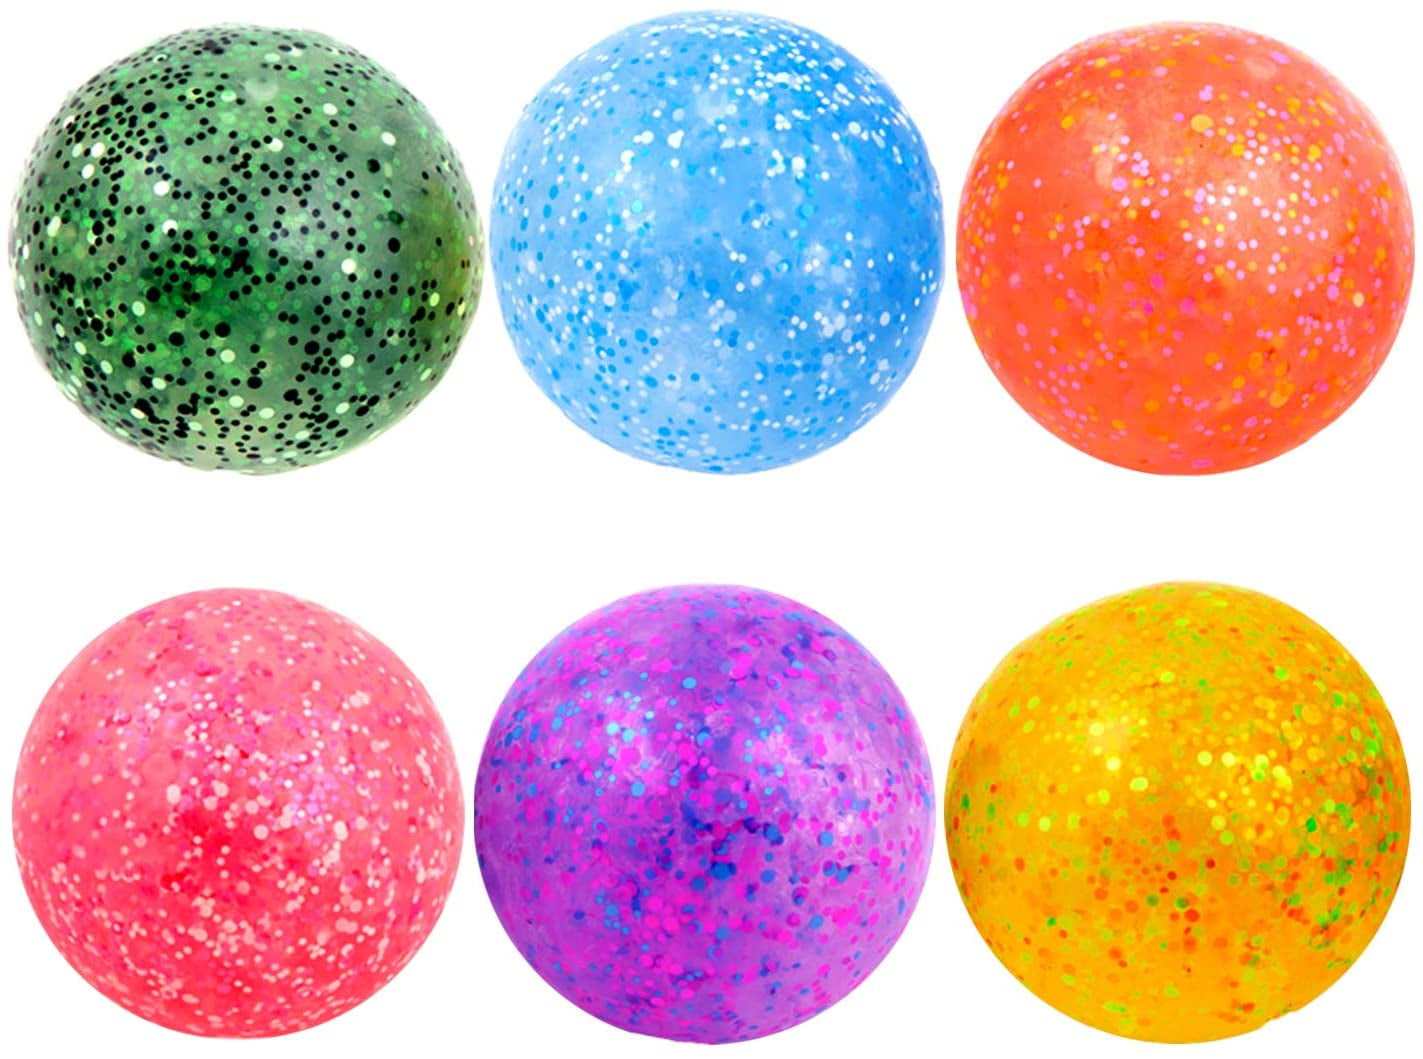 BIG SUPER Thick Fluffy LavenderGlitter Un/Scented Slime KidsToy Adult StressBall 